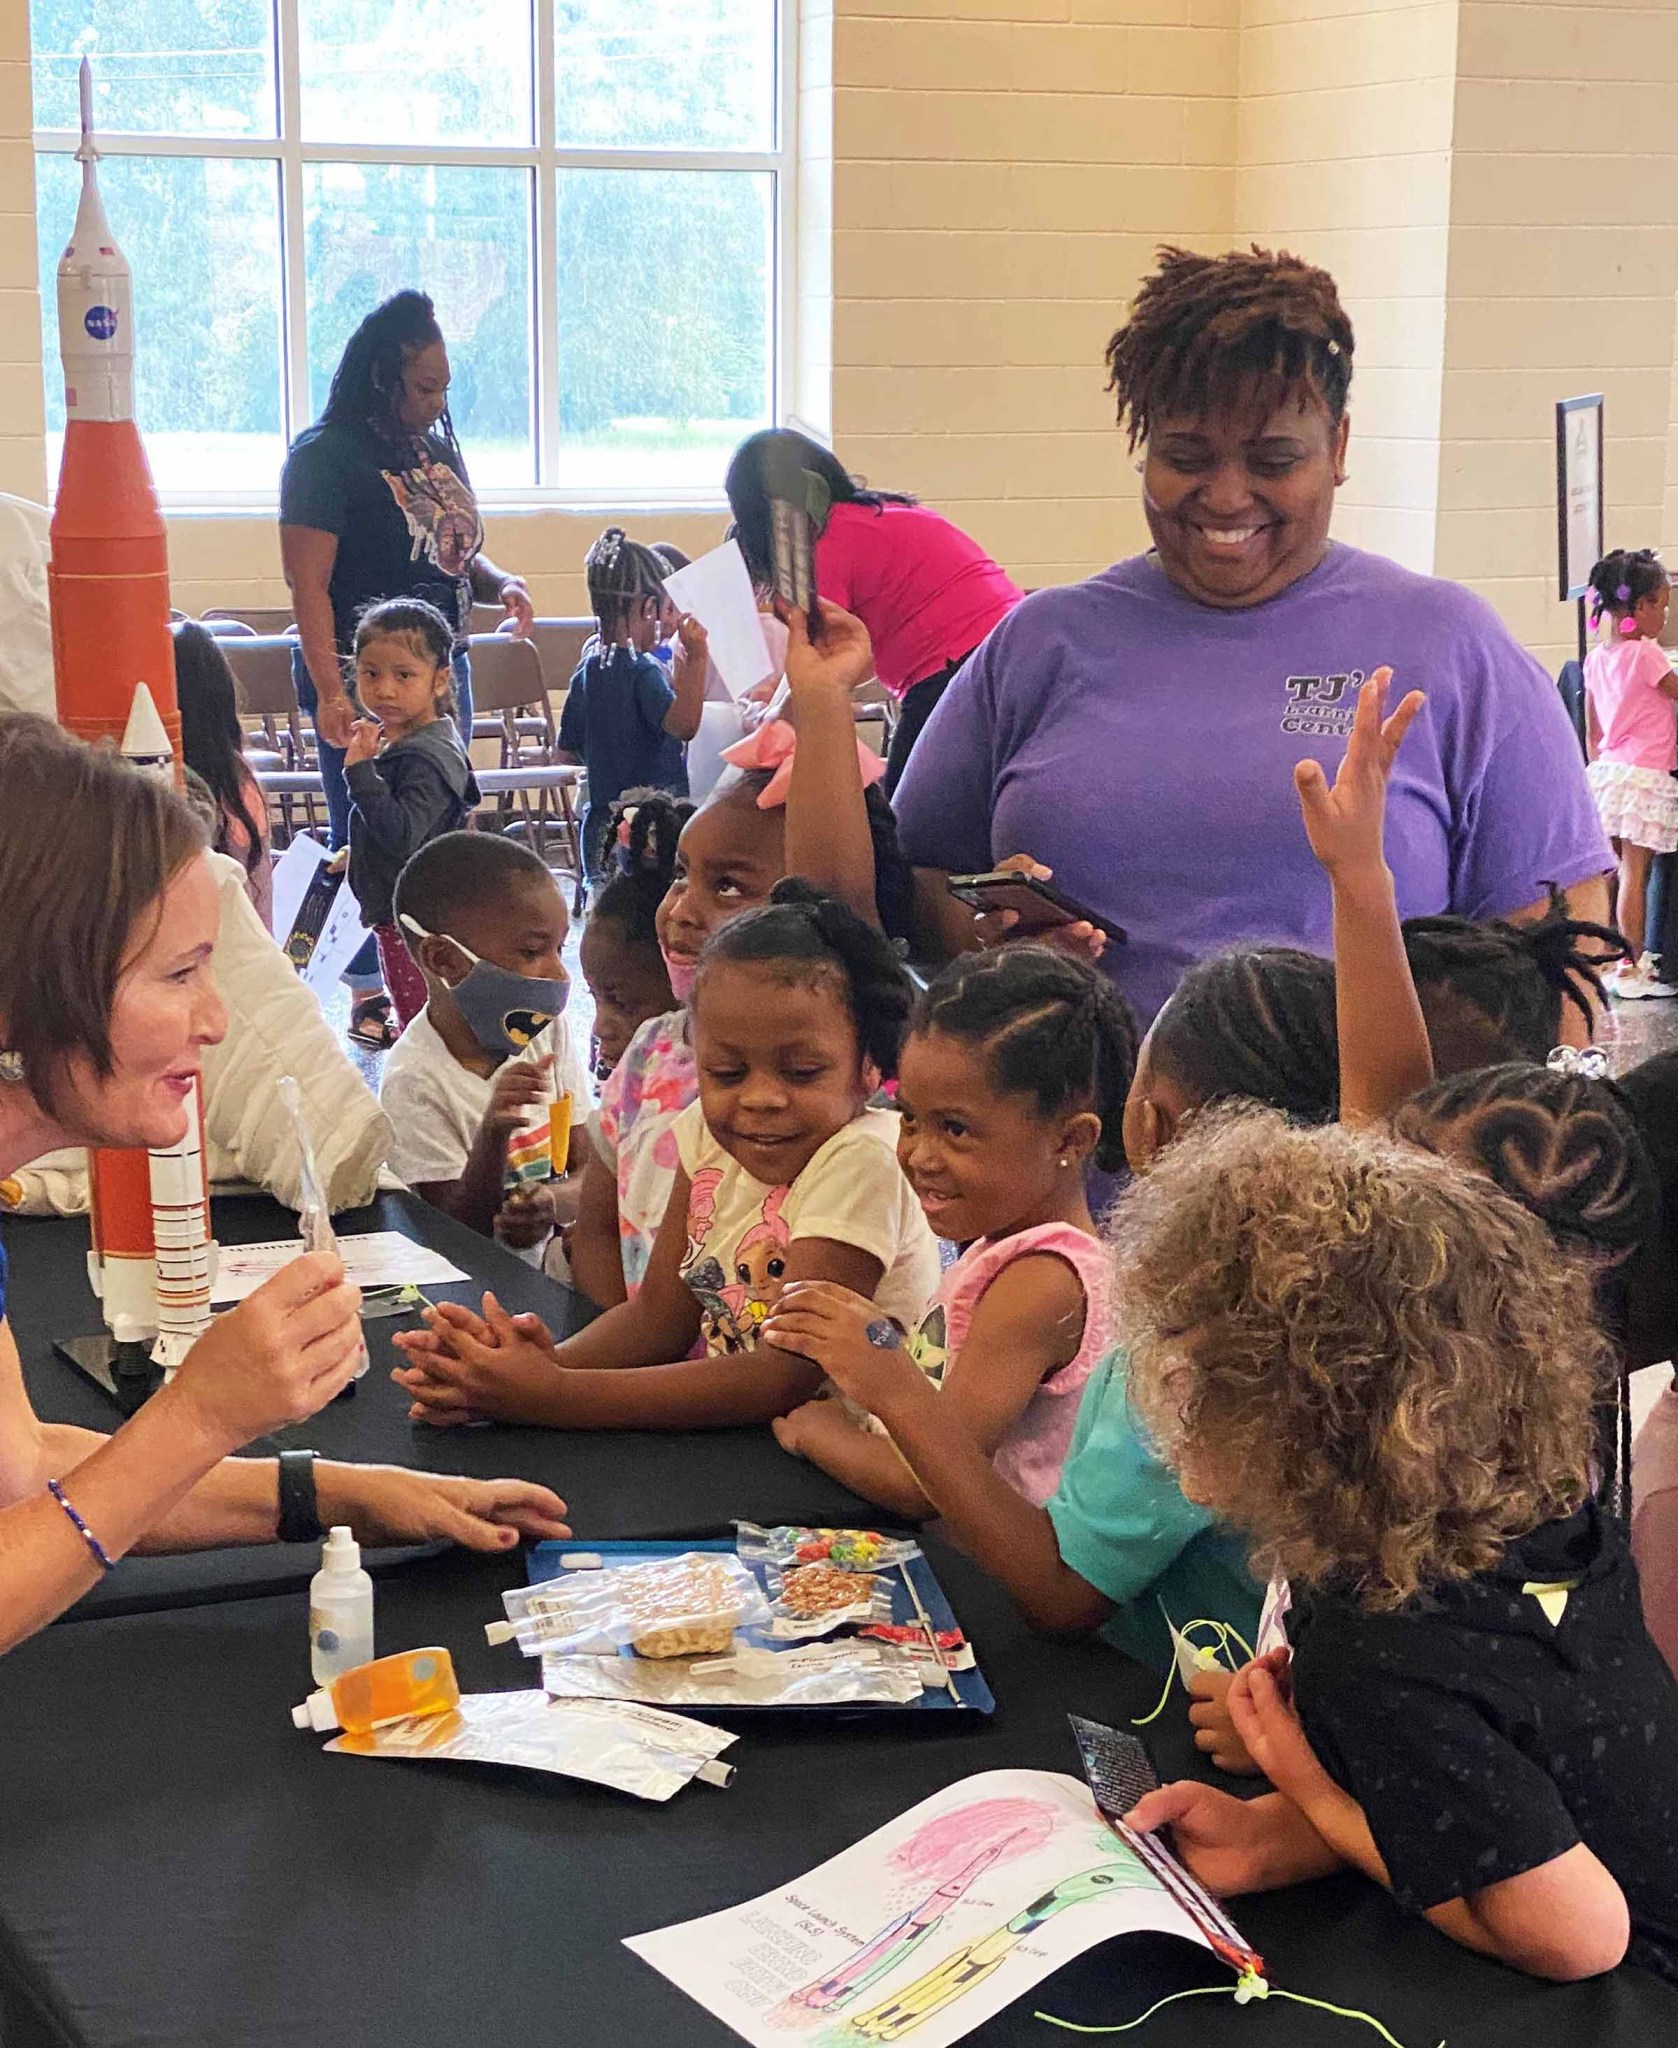 A representative from NASA’s Stennis Space Center teaches pre-K students at the Hattiesburg Early Learning Collaborative about life in space during a site outreach activity